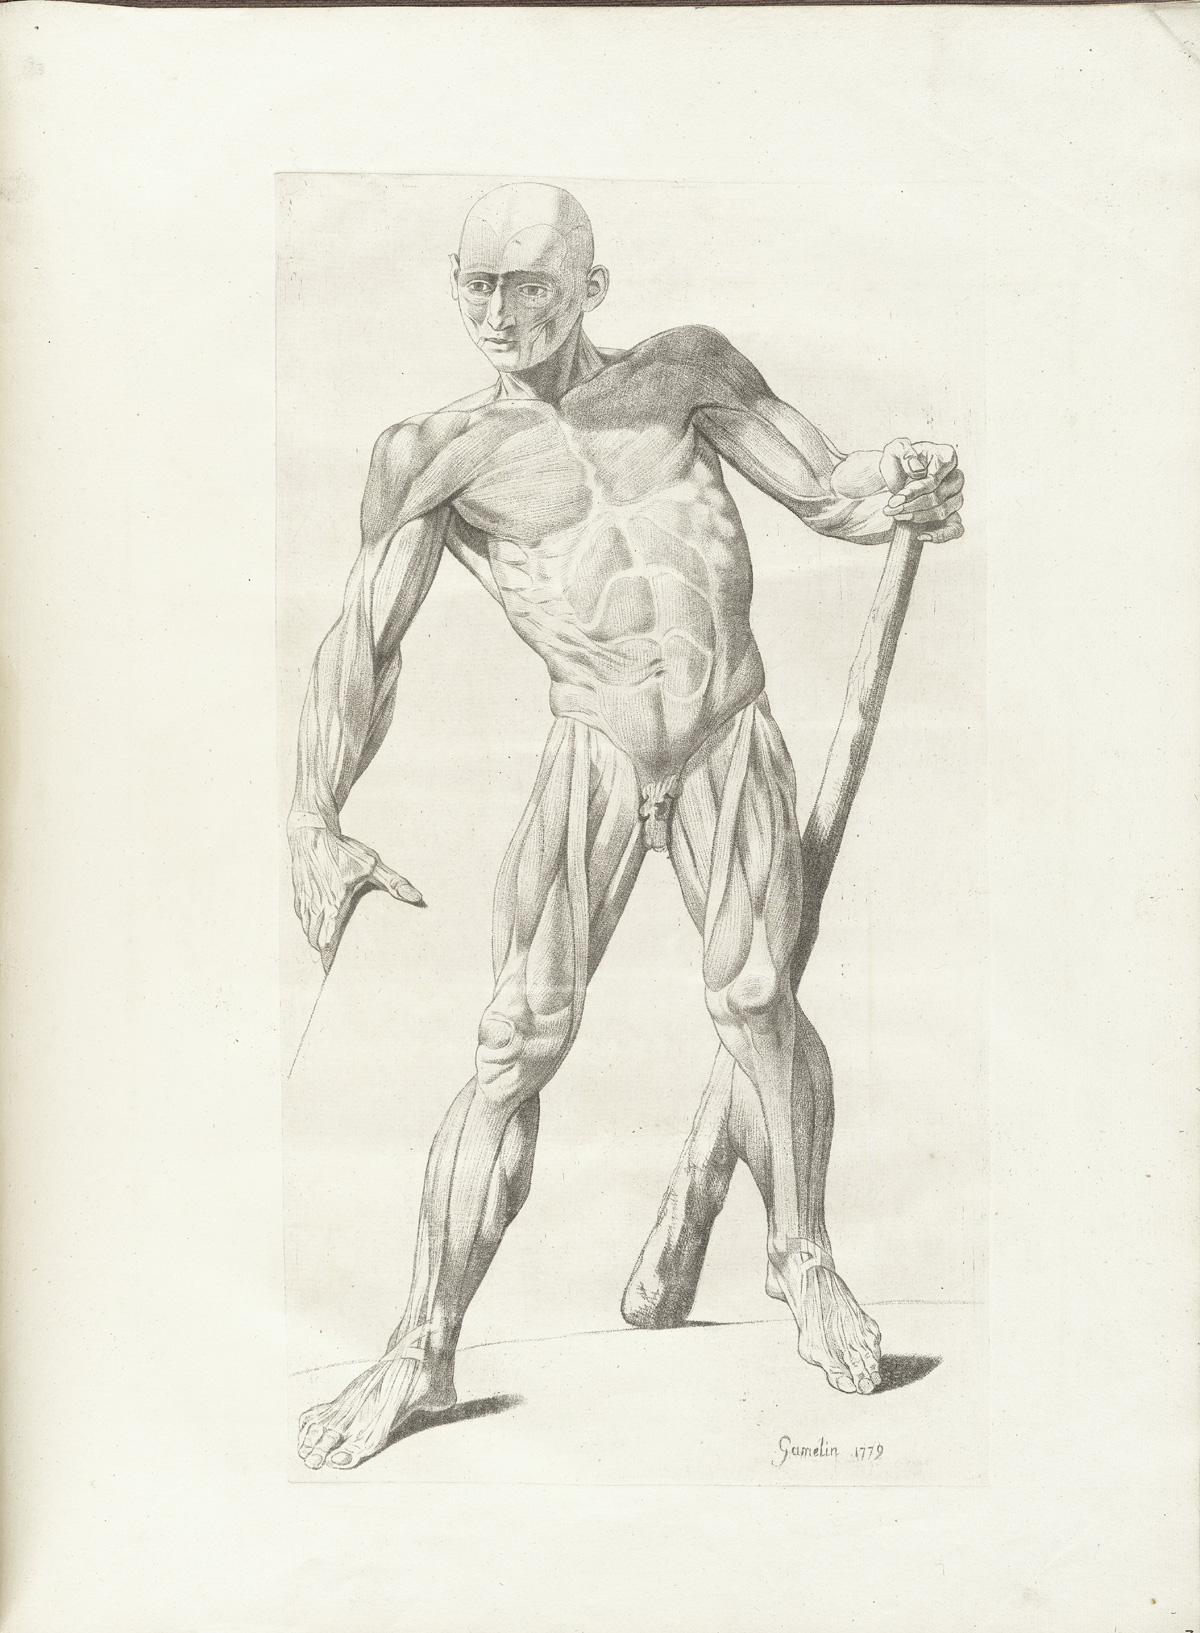 Engraving of a facing standing male muscle figure with legs standing apart and holding a staff in his left hand, showing the muscles of the chest, torso, abdomen, arms and legs.